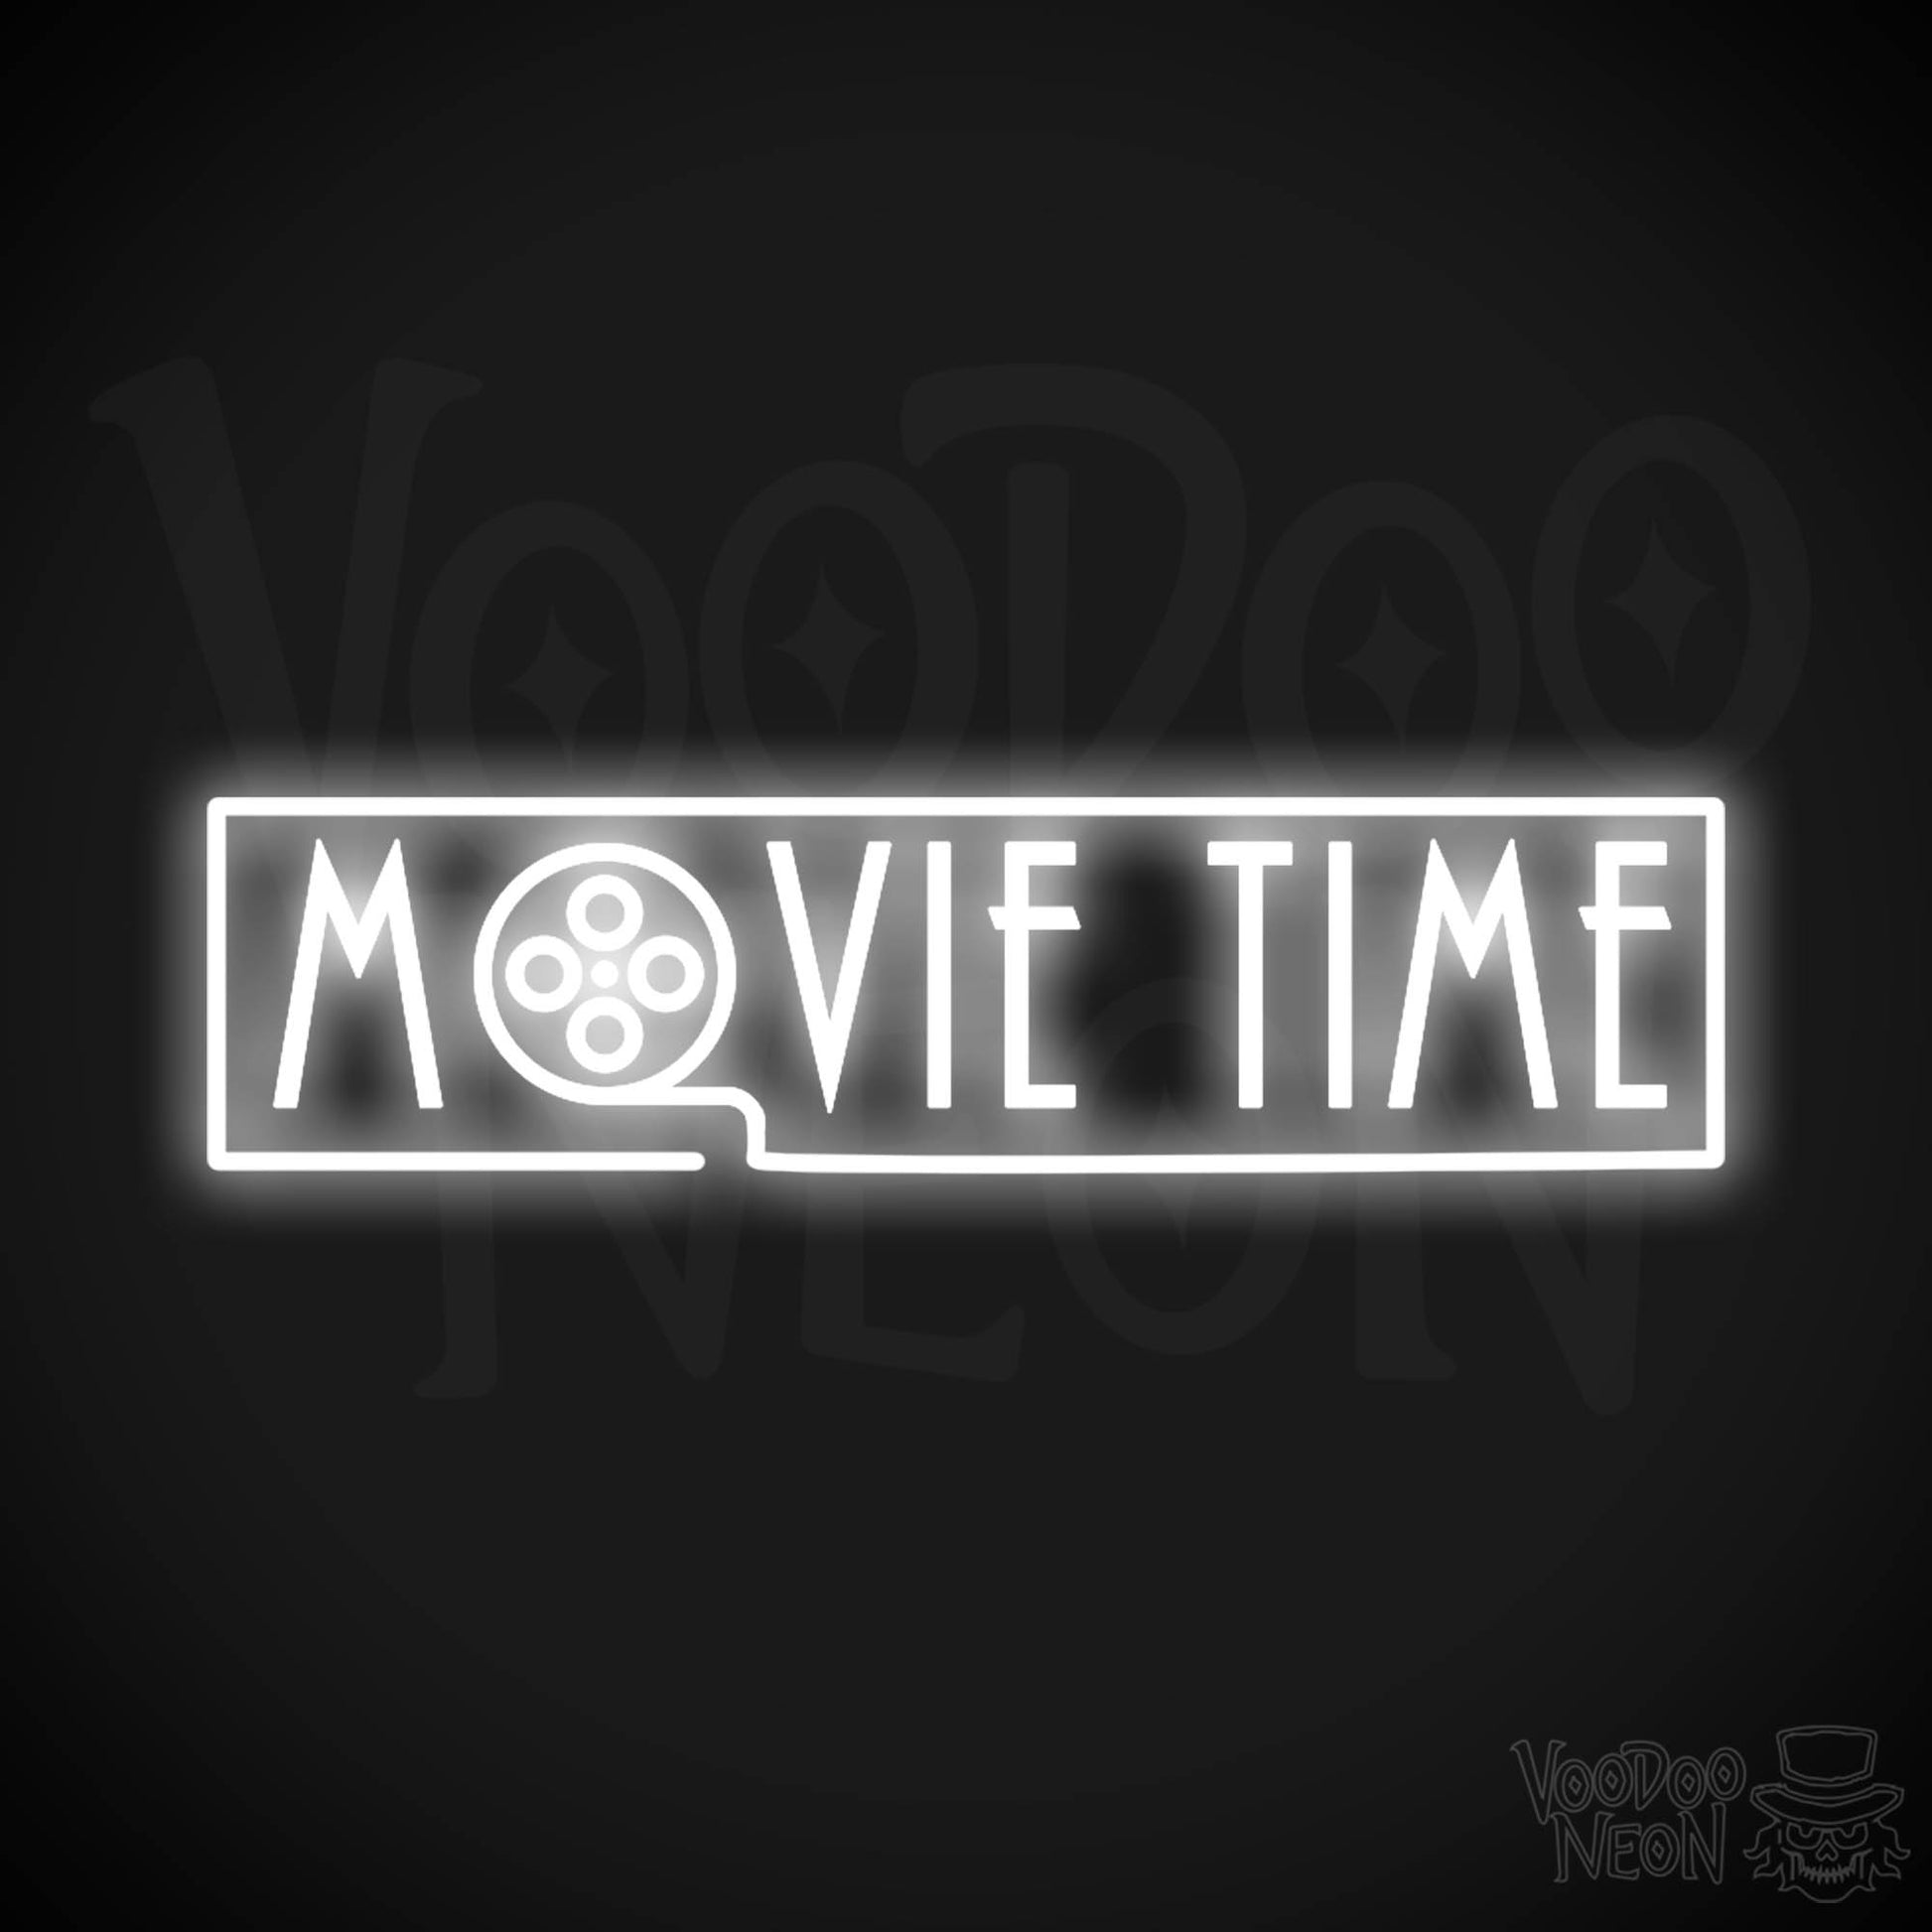 Movie Time Neon Sign - Neon Movie Time Sign - Color White